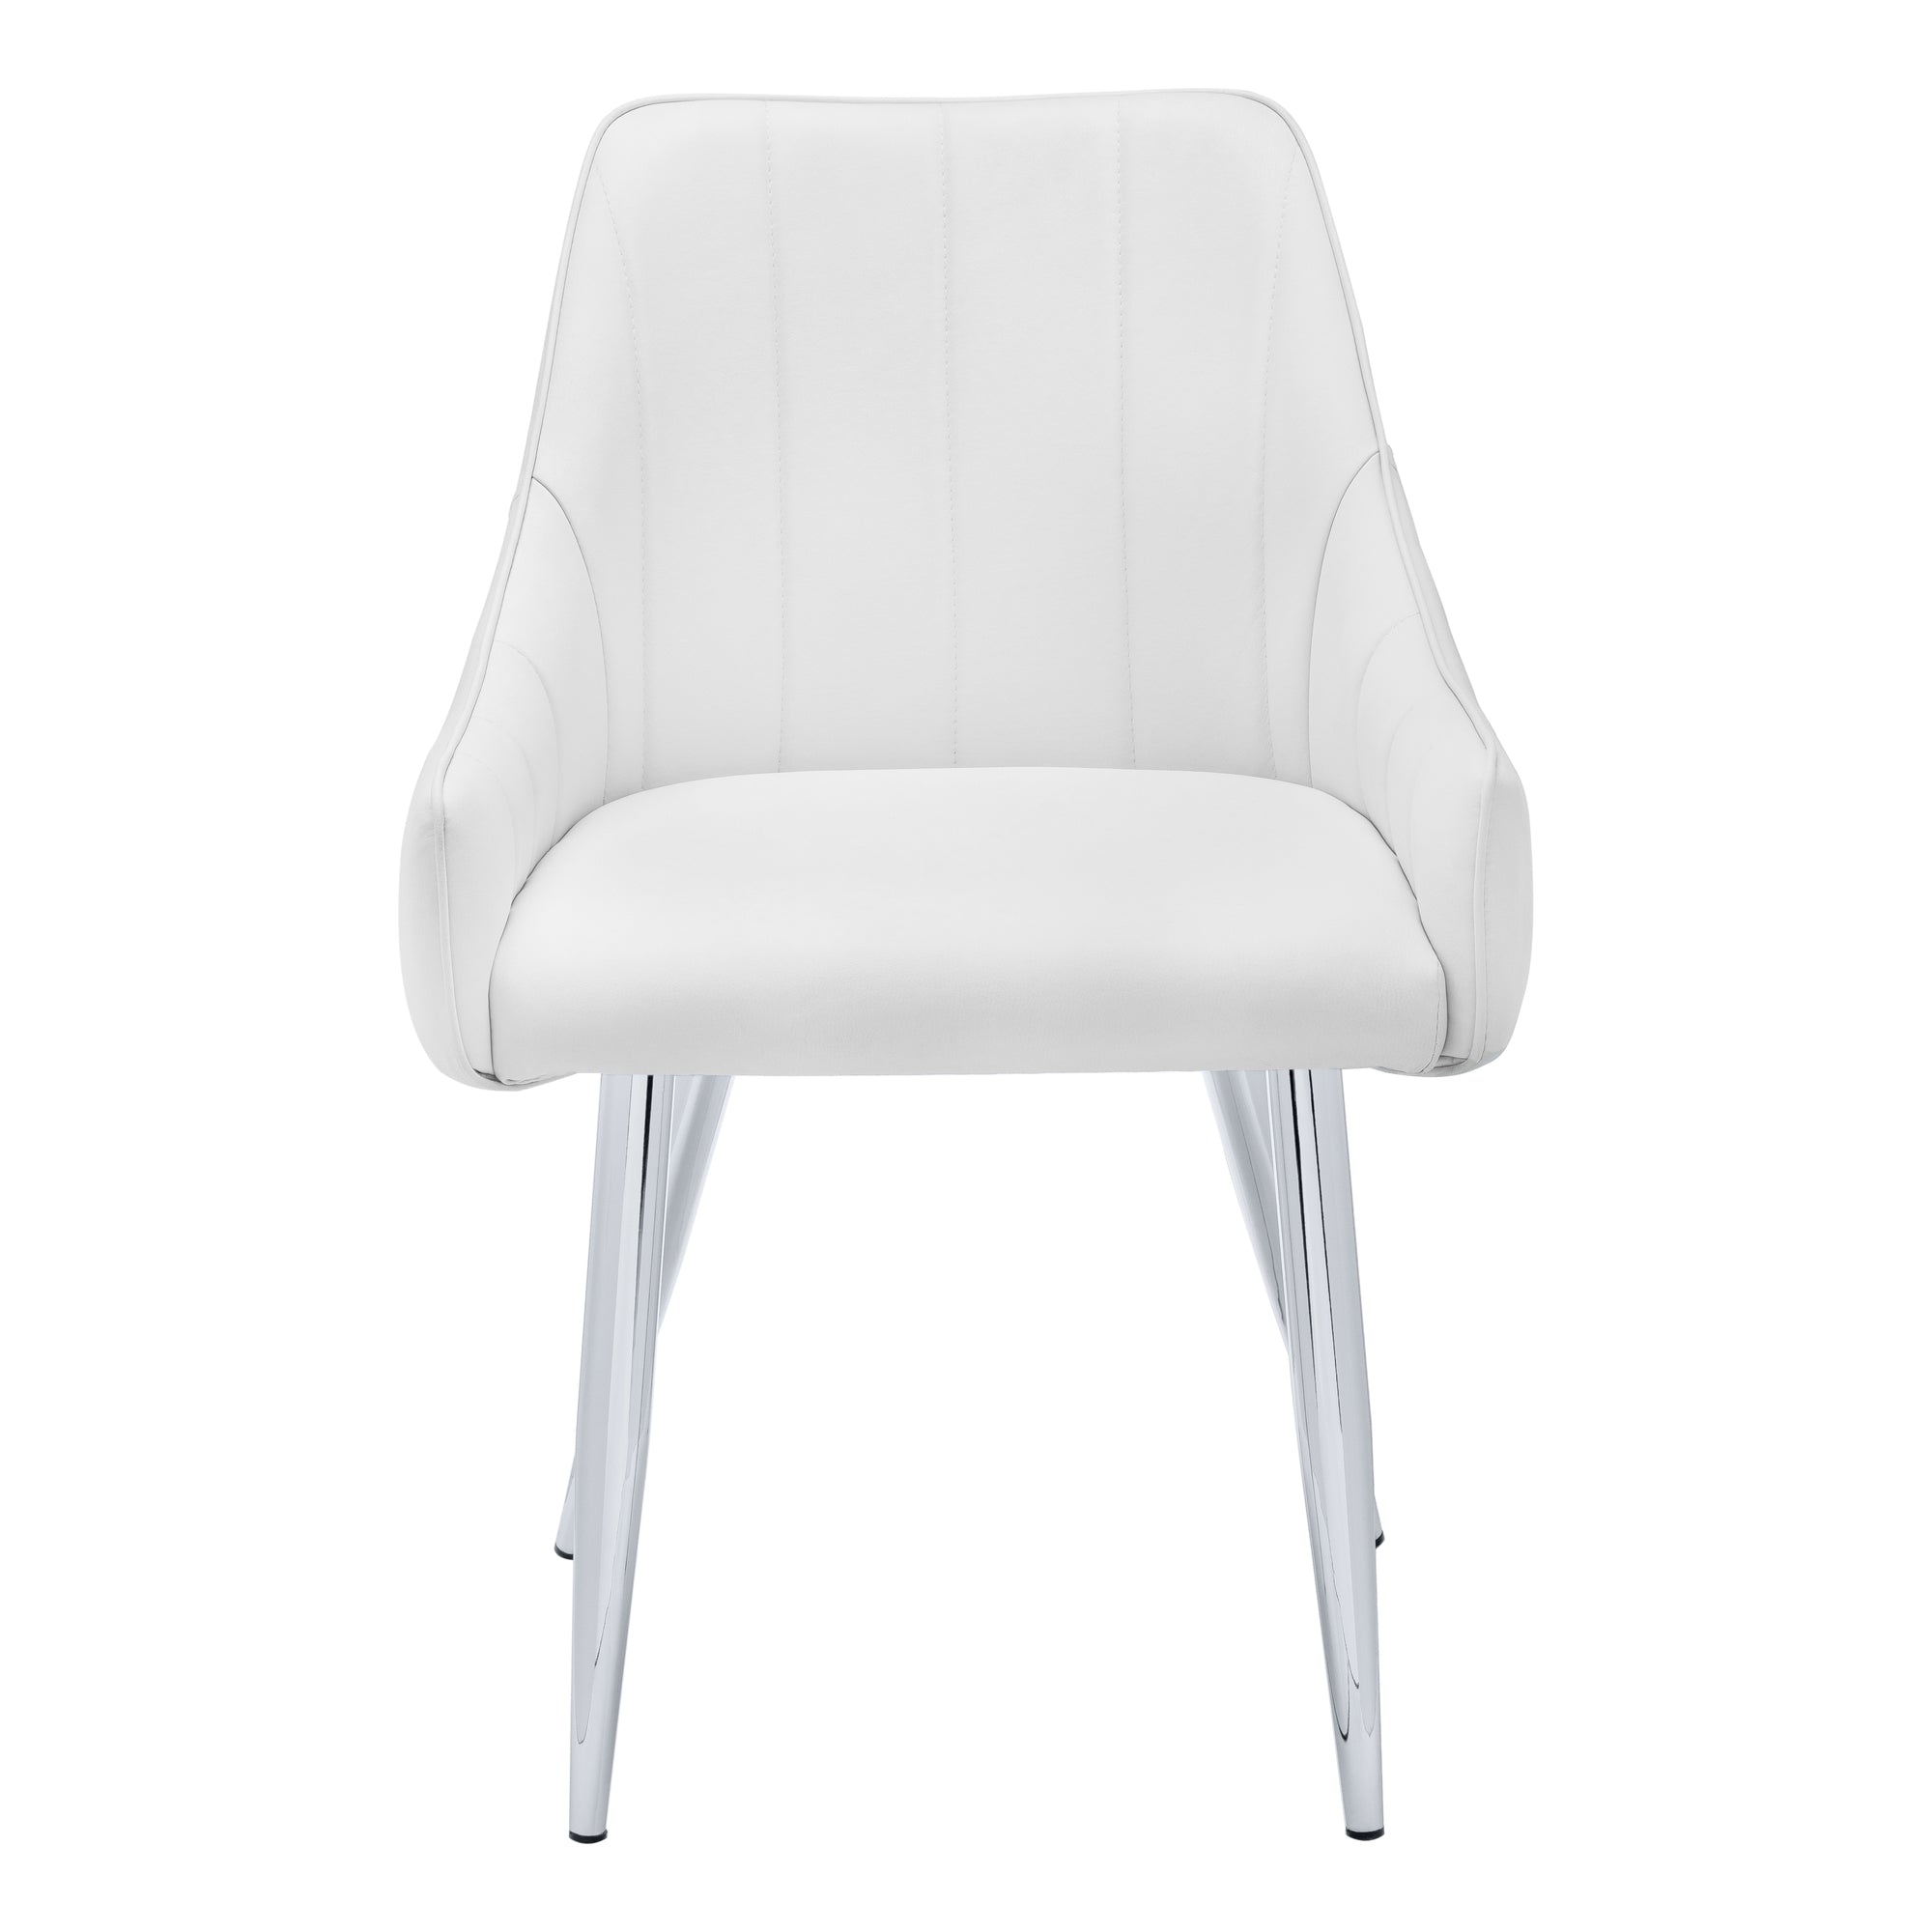 MN-781184    Dining Chair, Set Of 2, Side, Pu Leather-Look, Upholstered, Metal Legs, Kitchen, Dining Room, Leather Look, Metal Legs, White, Chrome, Contemporary, Modern